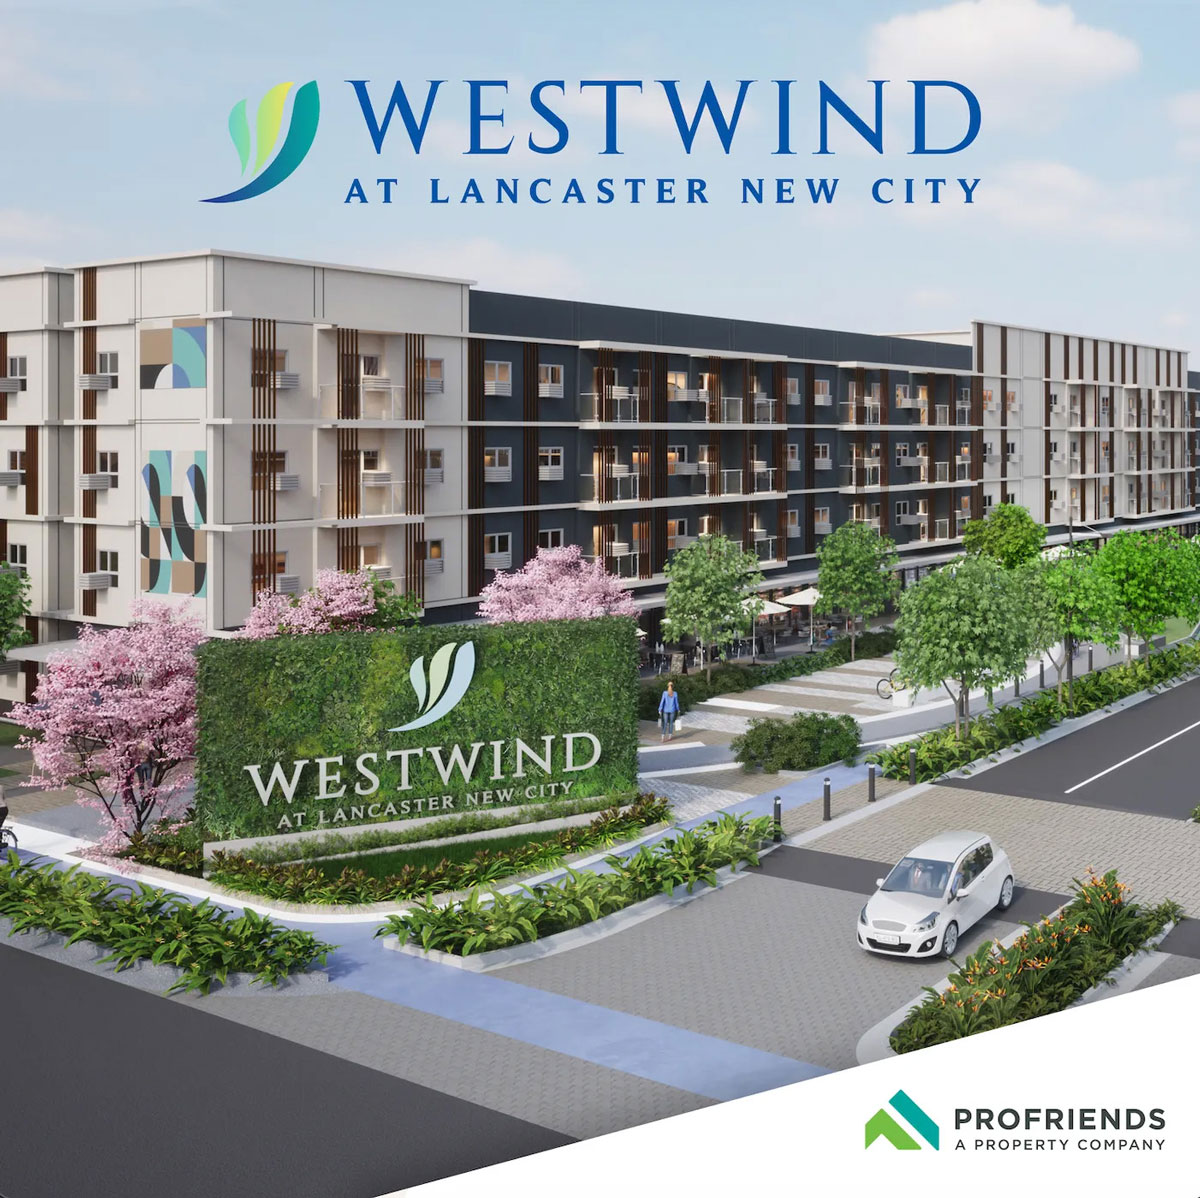 Westwind at Lancaster New City